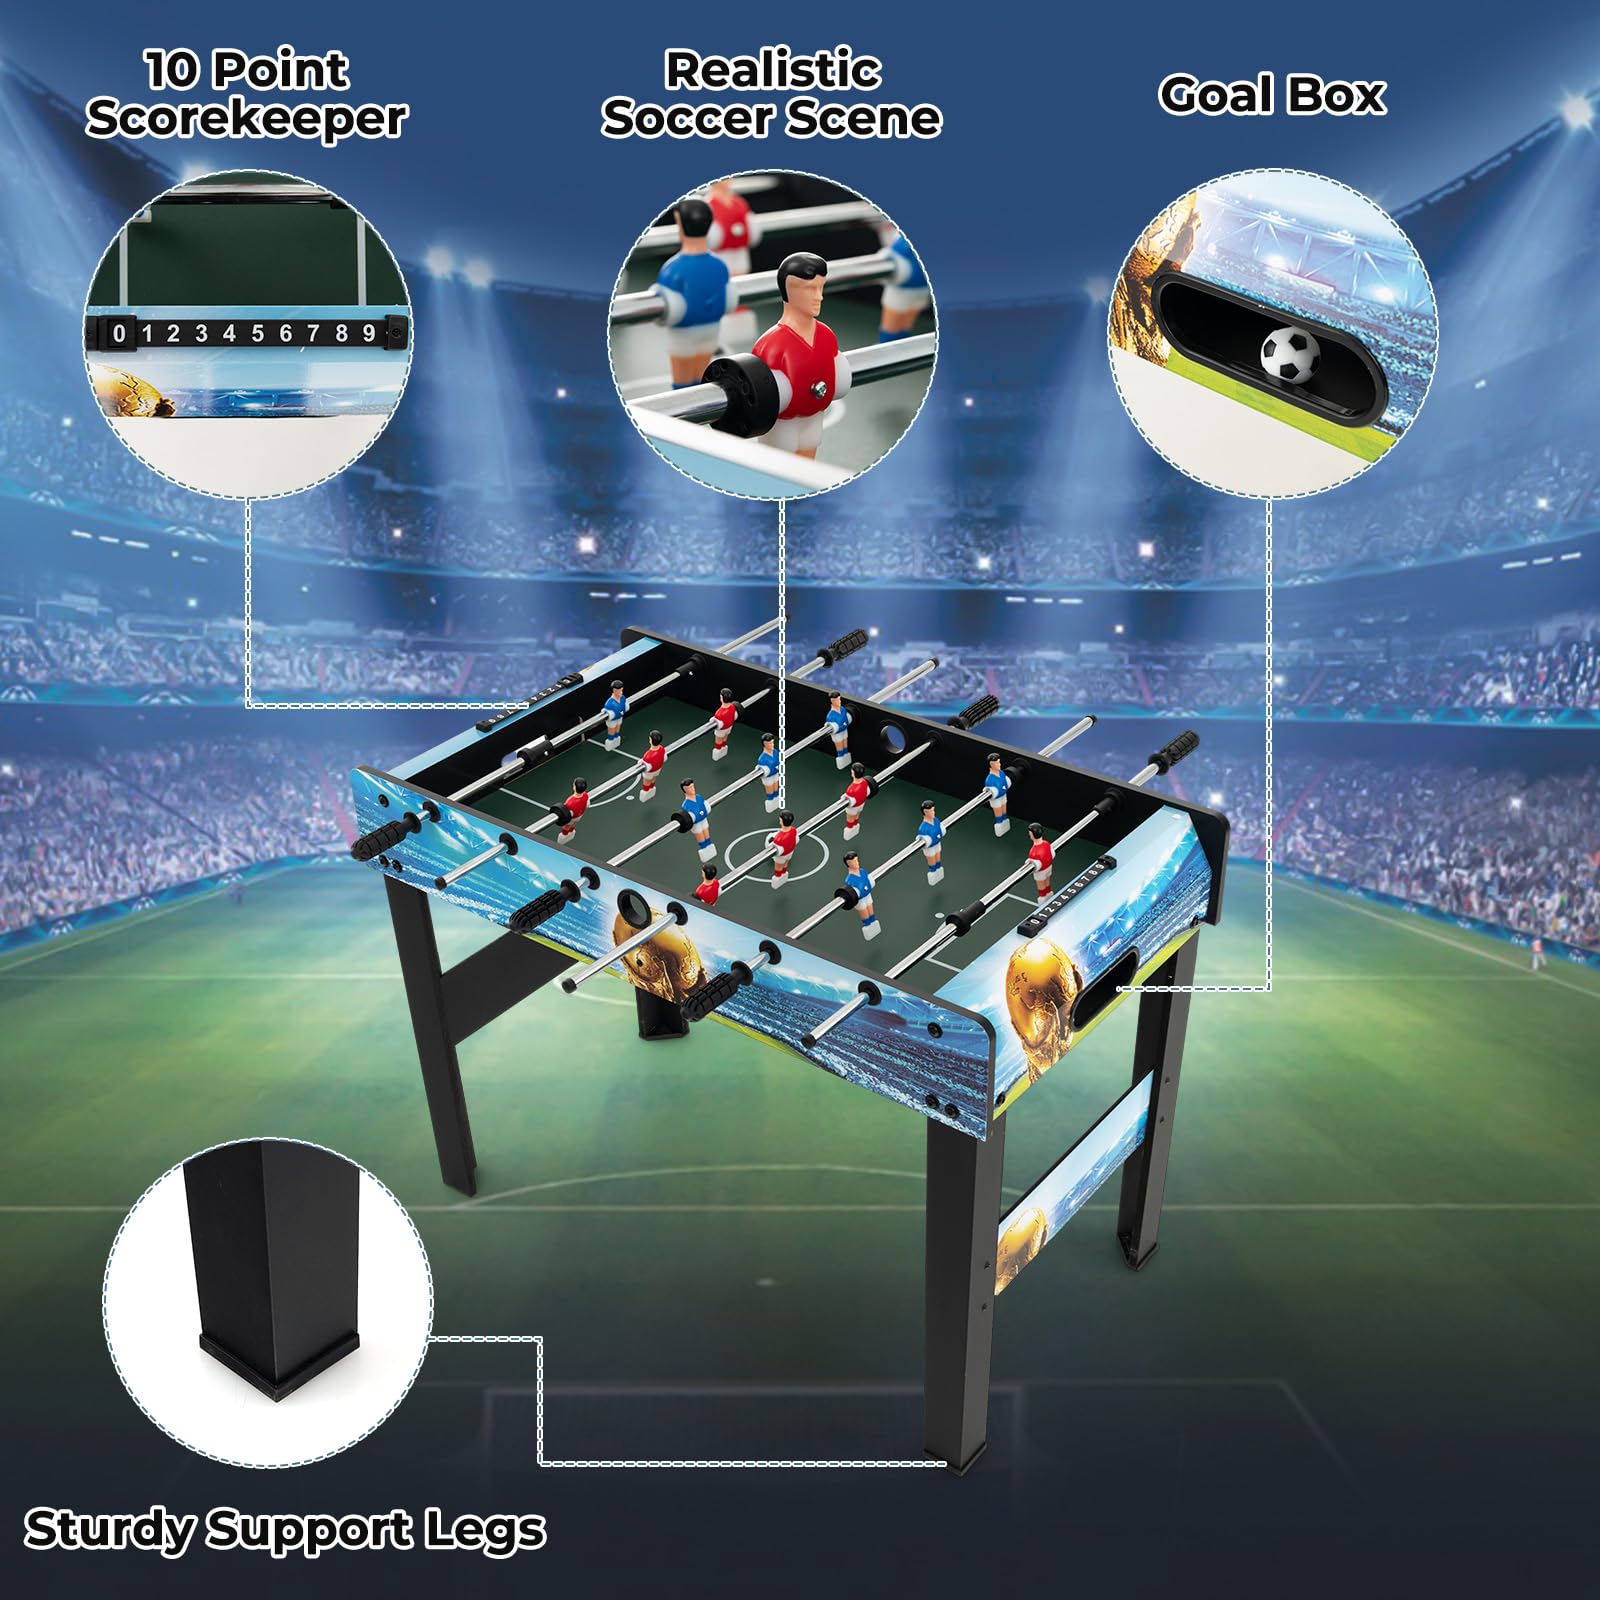 Giantex Foosball Table, 37" Foosball Table Adult Size, with 2 Balls, Score Keeper, Removable Legs